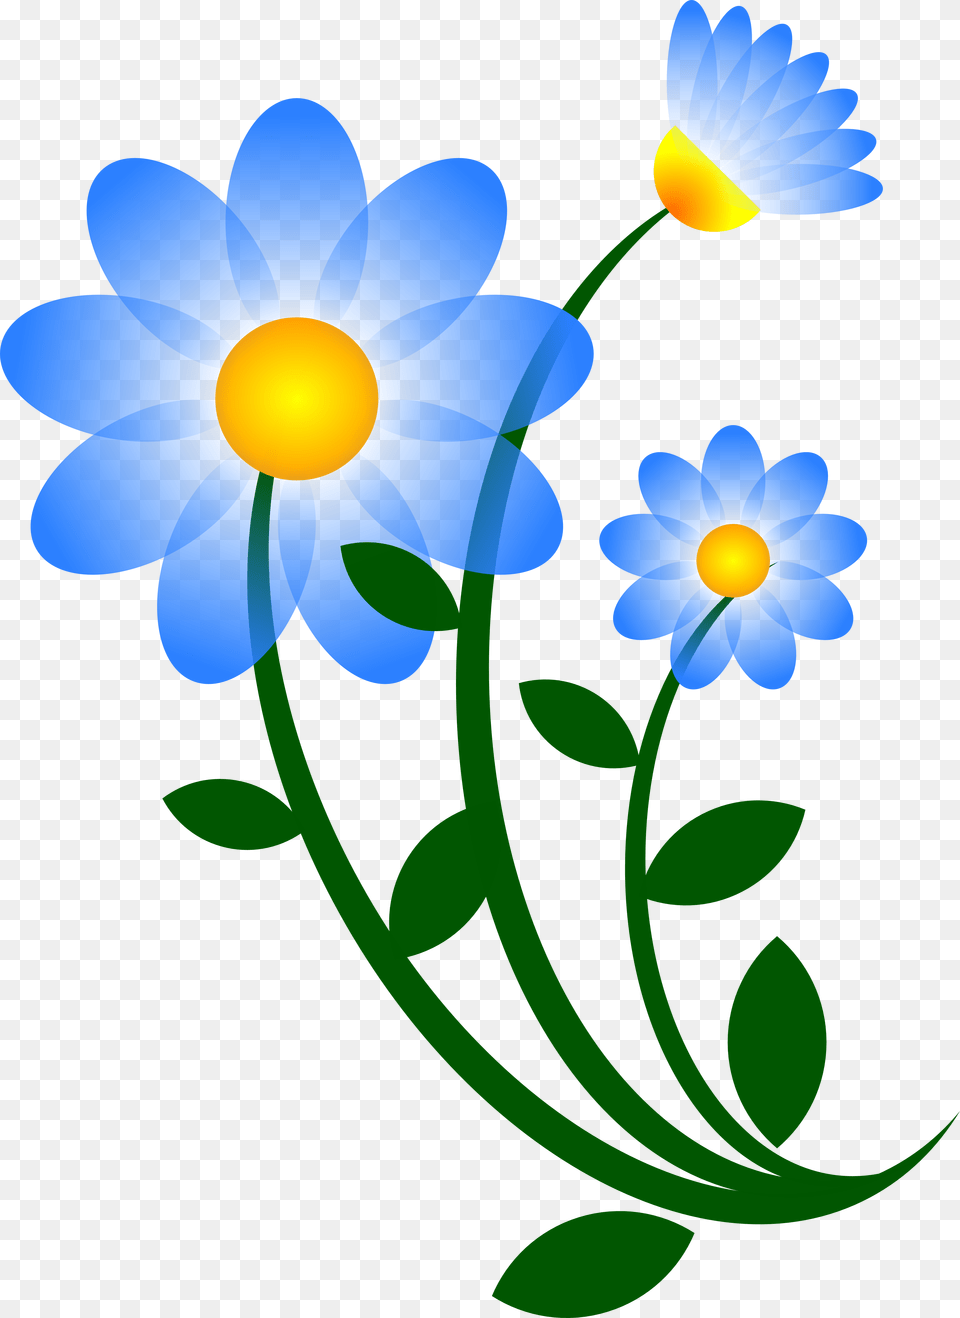 Sunflower Transparent Background Flower Image Clip Art, Anemone, Plant, Graphics, Daisy Free Png